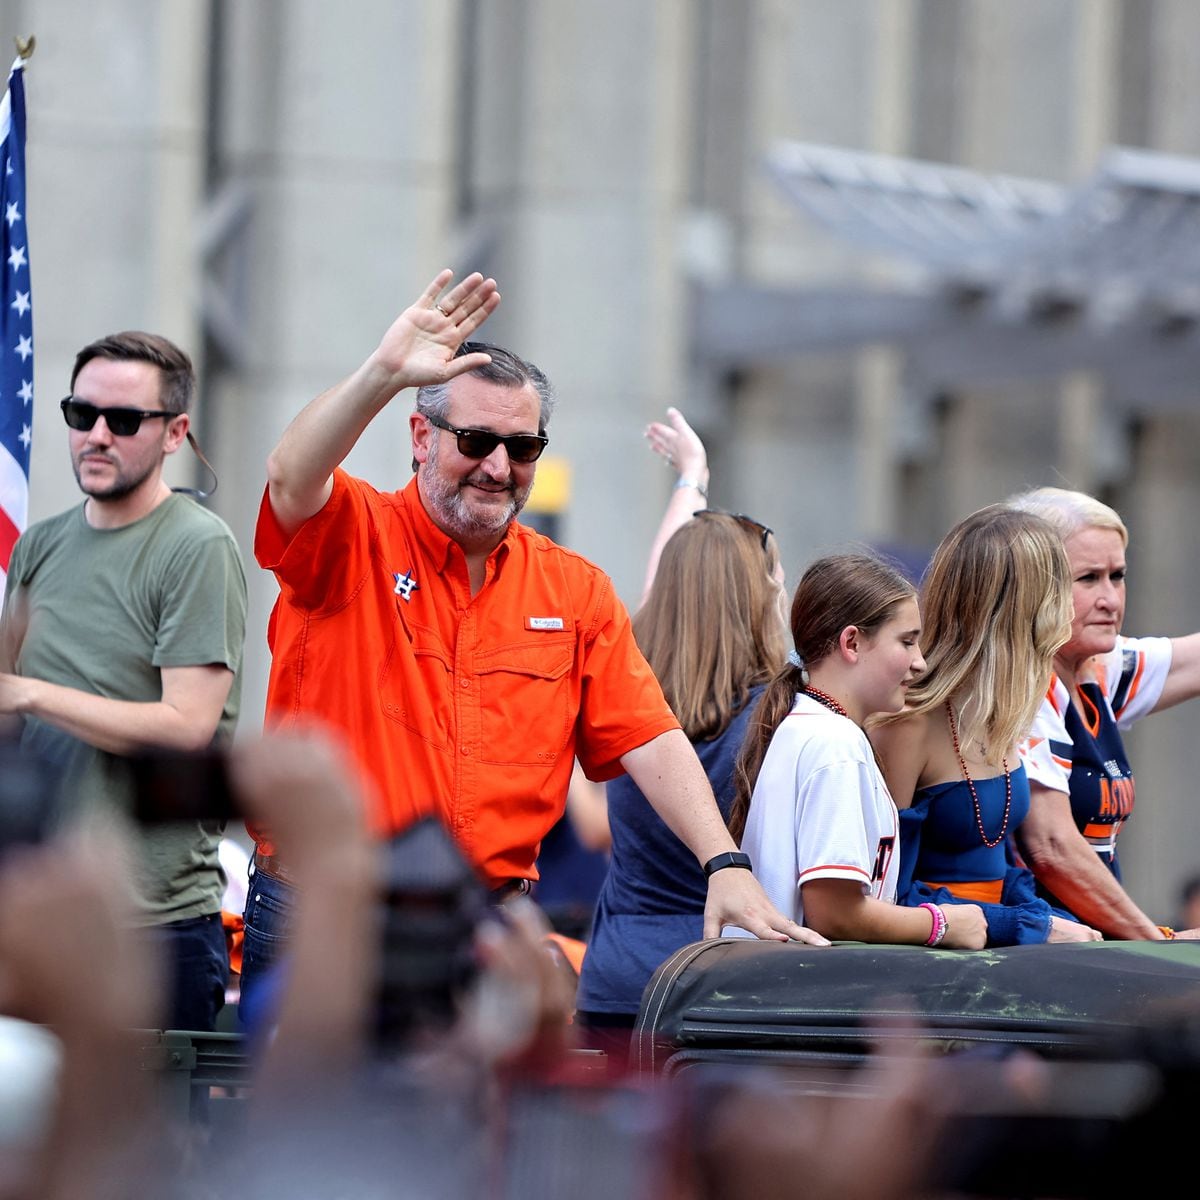 Ted Cruz booed at Houston Astros victory parade, hit with beer can: Video